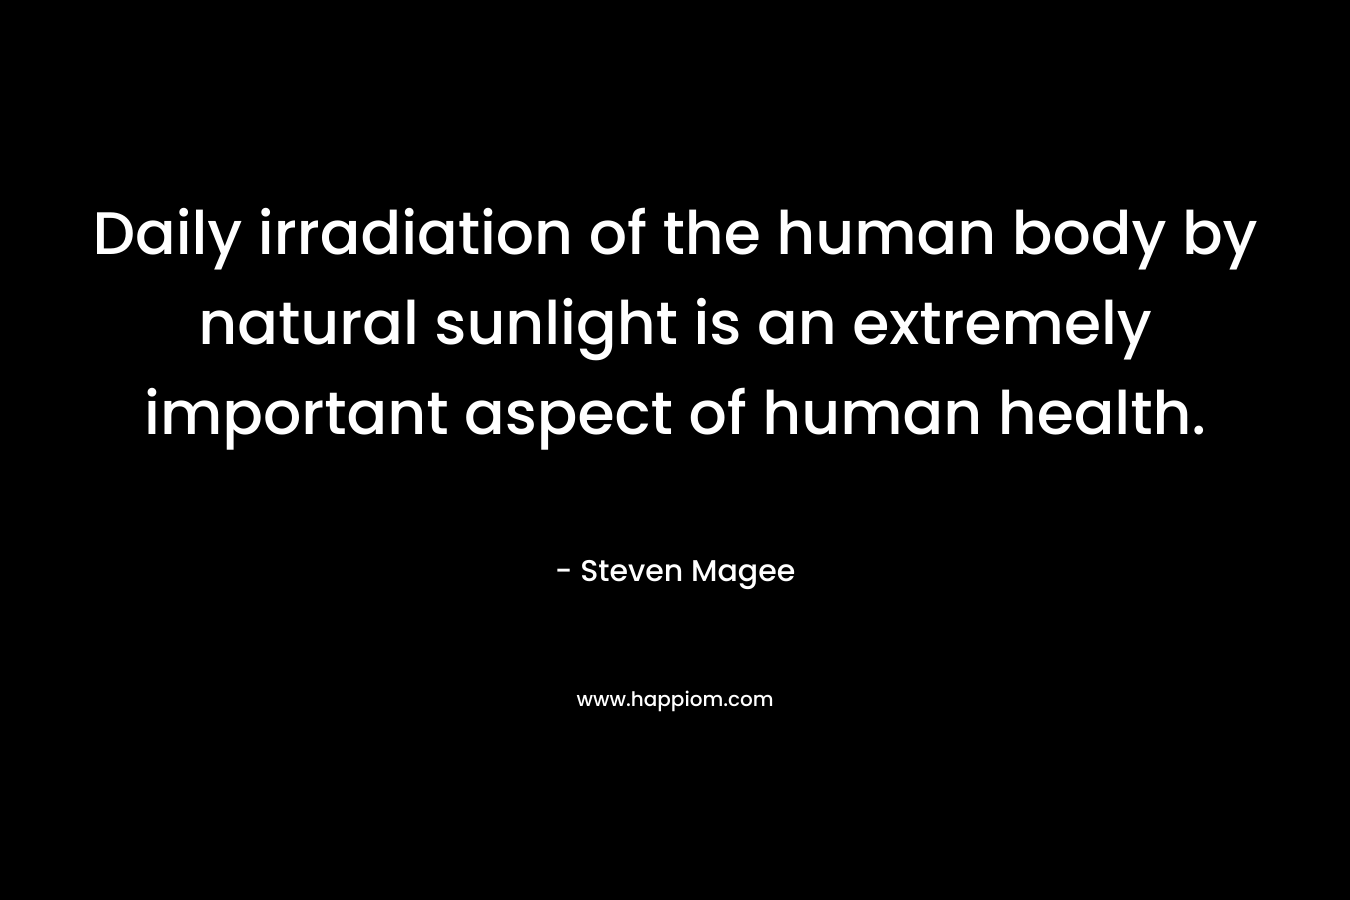 Daily irradiation of the human body by natural sunlight is an extremely important aspect of human health. – Steven Magee